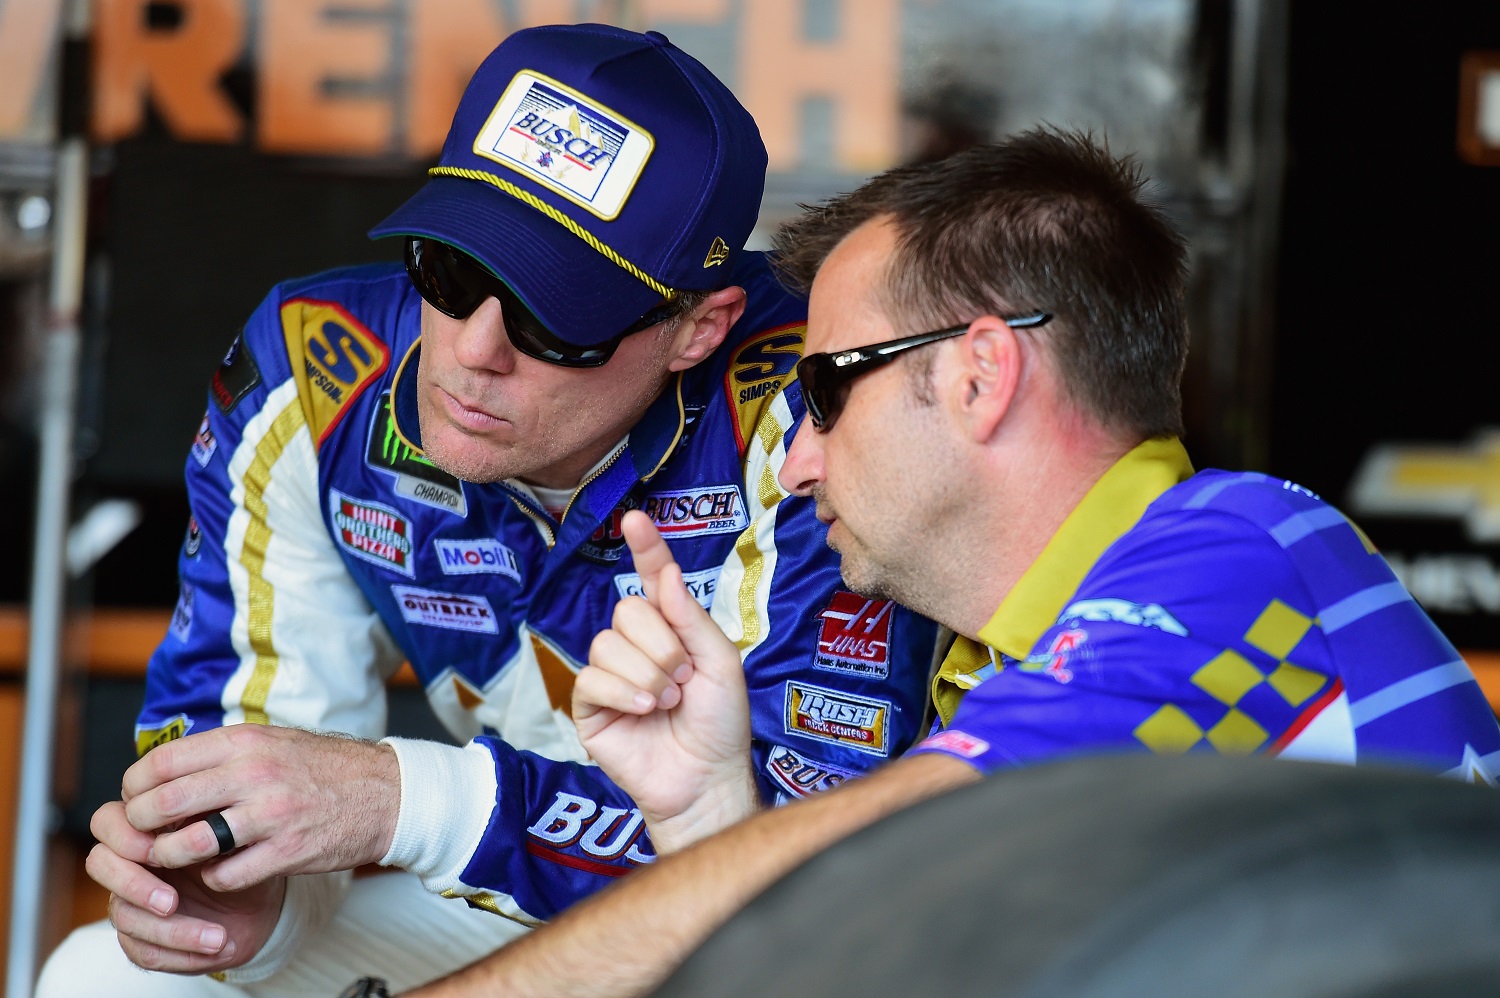 Kevin Harvick, driver of the No. 4 Ford, and crew chief Rodney Childers talk in the garage during practice for the Monster Energy NASCAR Cup Series Bojangles' Southern 500 at Darlington Raceway in 2018.